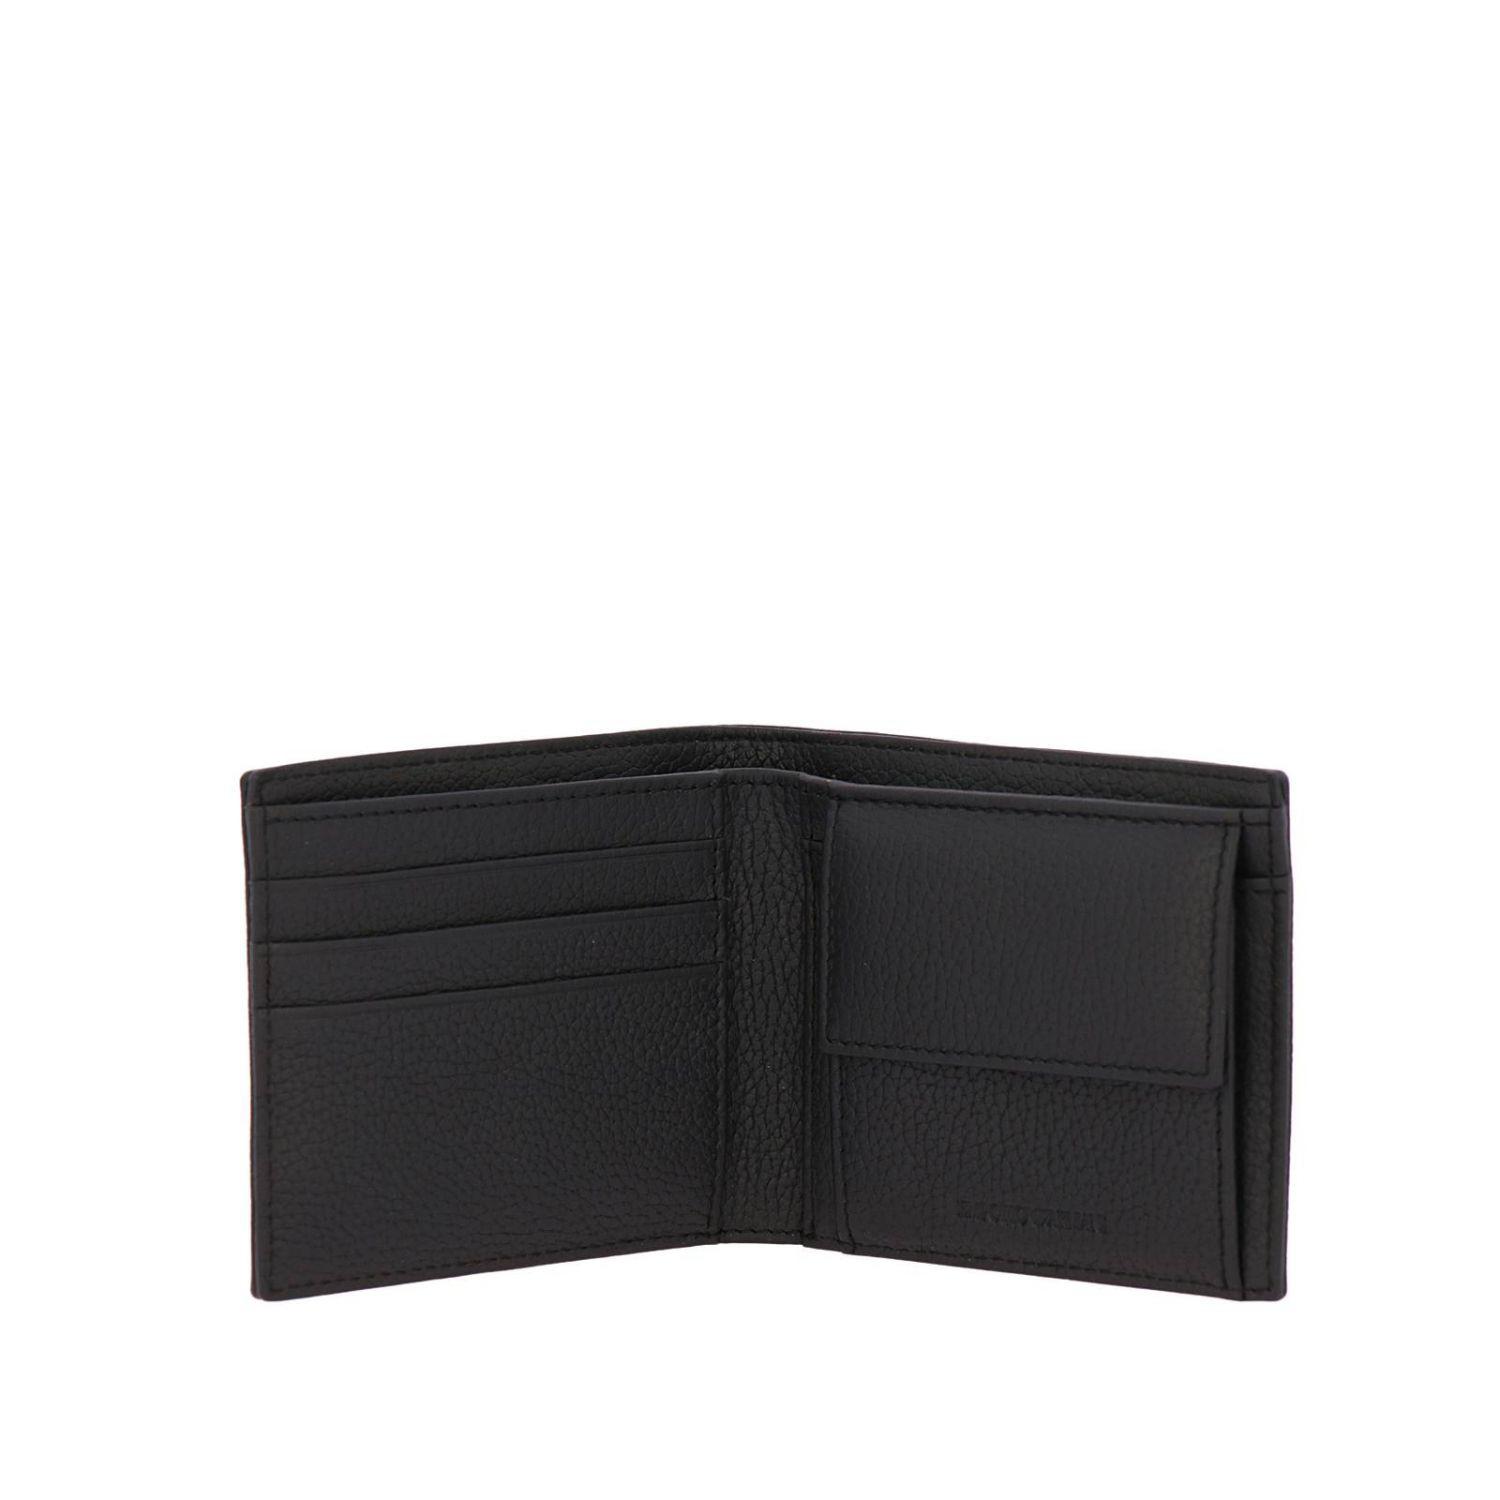 Emporio Armani Badge Small Leather Bifold Wallet With Coin Pocket in Black for Men - Lyst